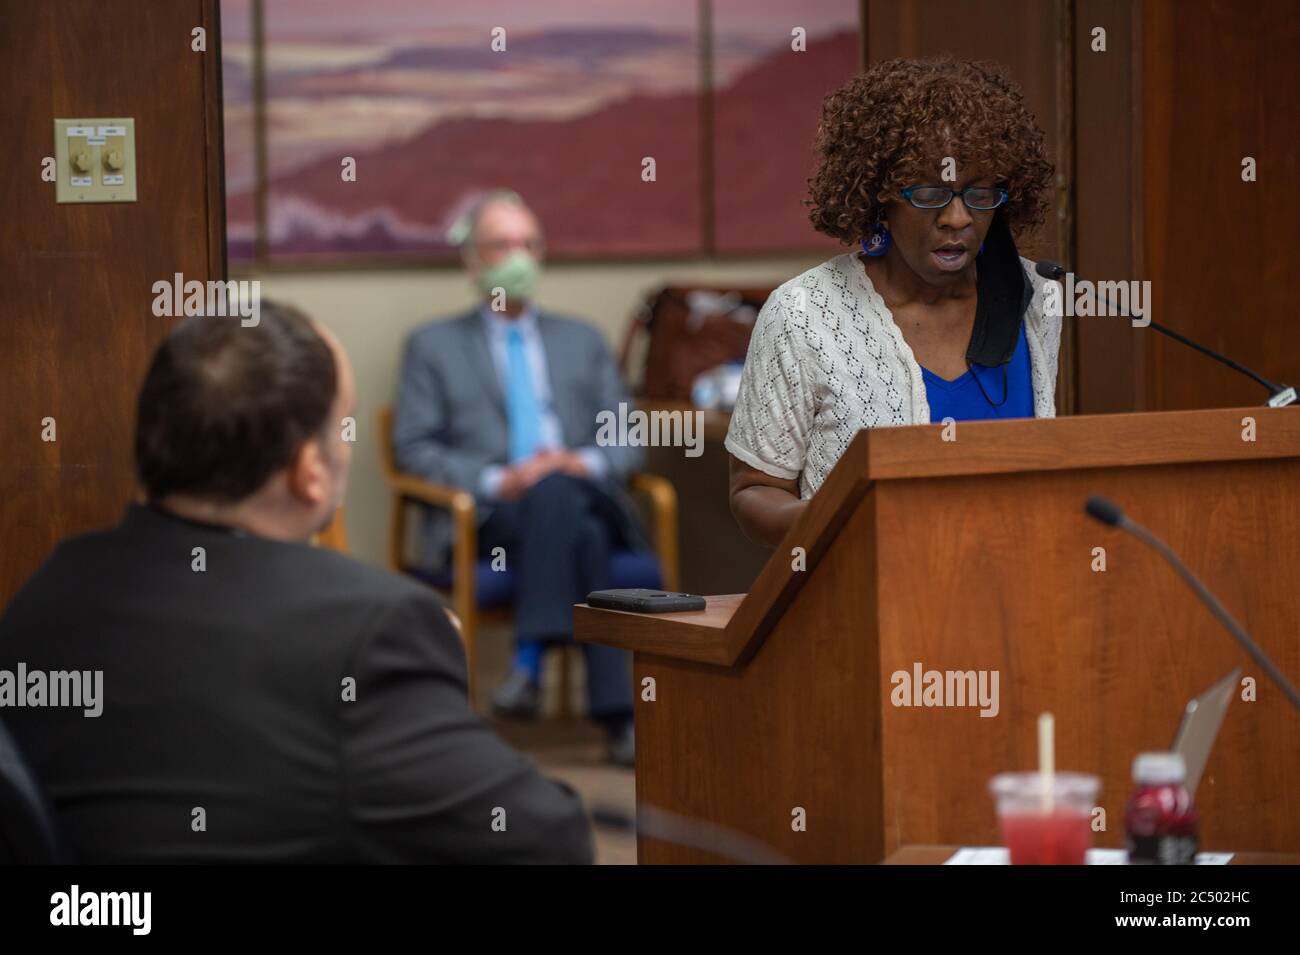 Manhattan, Kansas, USA. 29th June, 2020. TERESA RYNAI PARKS, speaks to the Riley County Commission on Monday. PARKS, and other community members addressed the commission regarding community masking and racial tensions within the county. Credit: Luke Townsend/ZUMA Wire/Alamy Live News Stock Photo